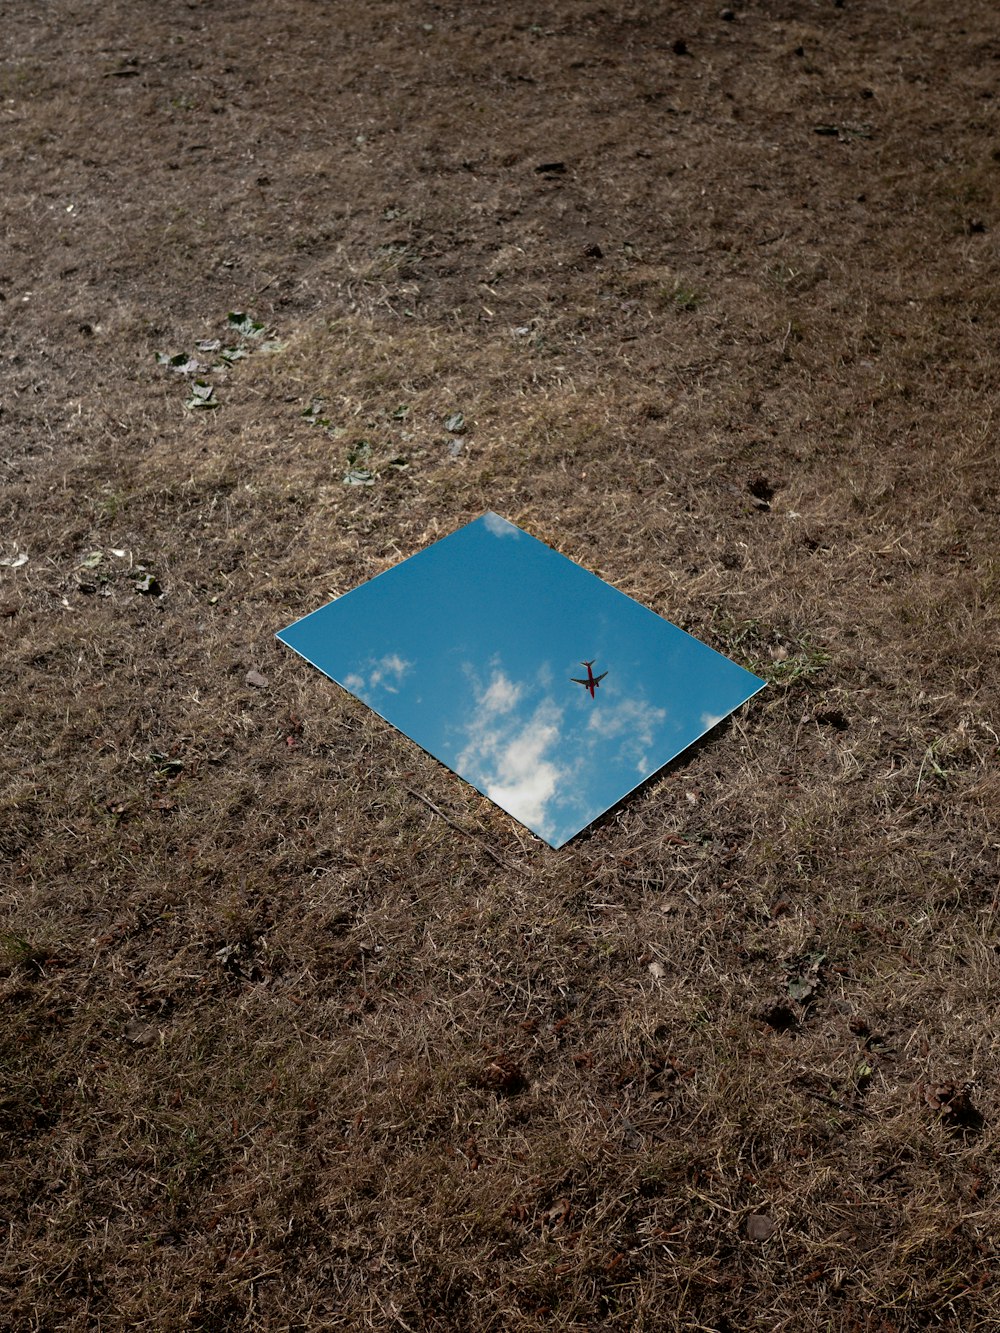 a square shaped mirror on the ground with a plane in the sky